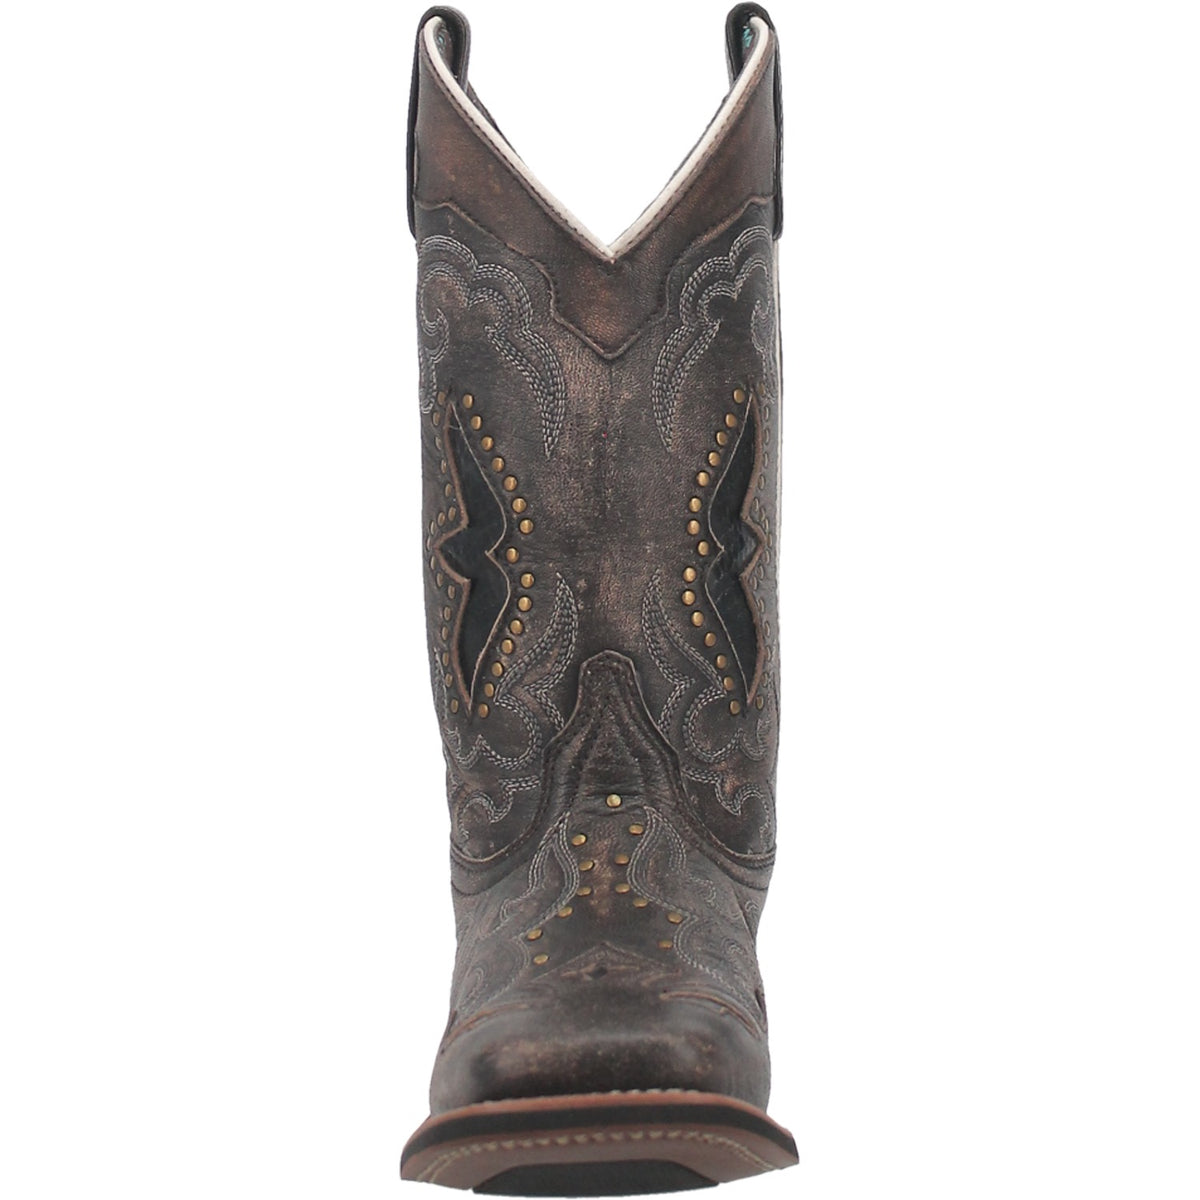 SPELLBOUND LEATHER BOOT Cover